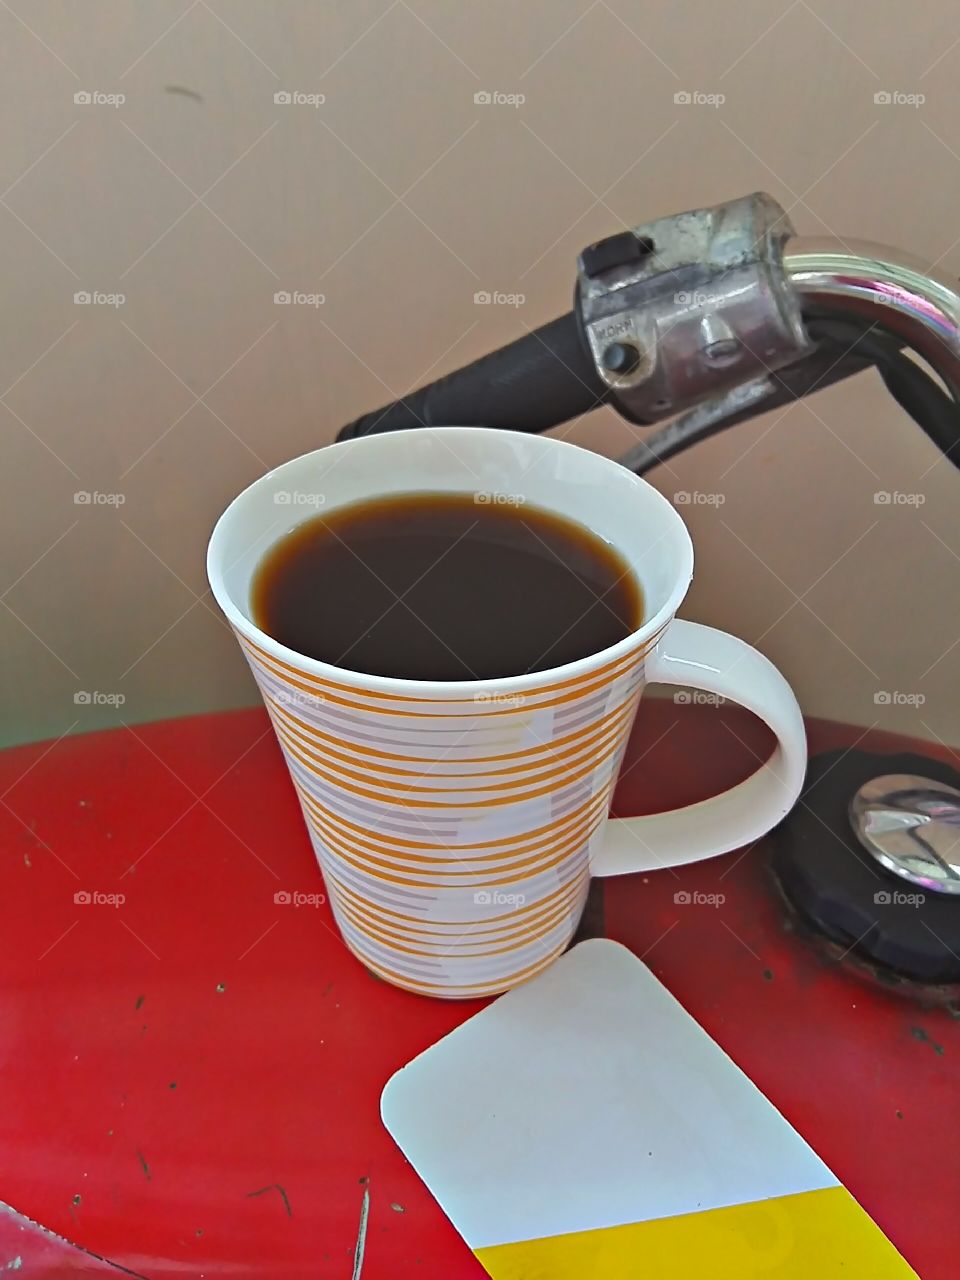 Morning black coffee first before riding the motorbike..